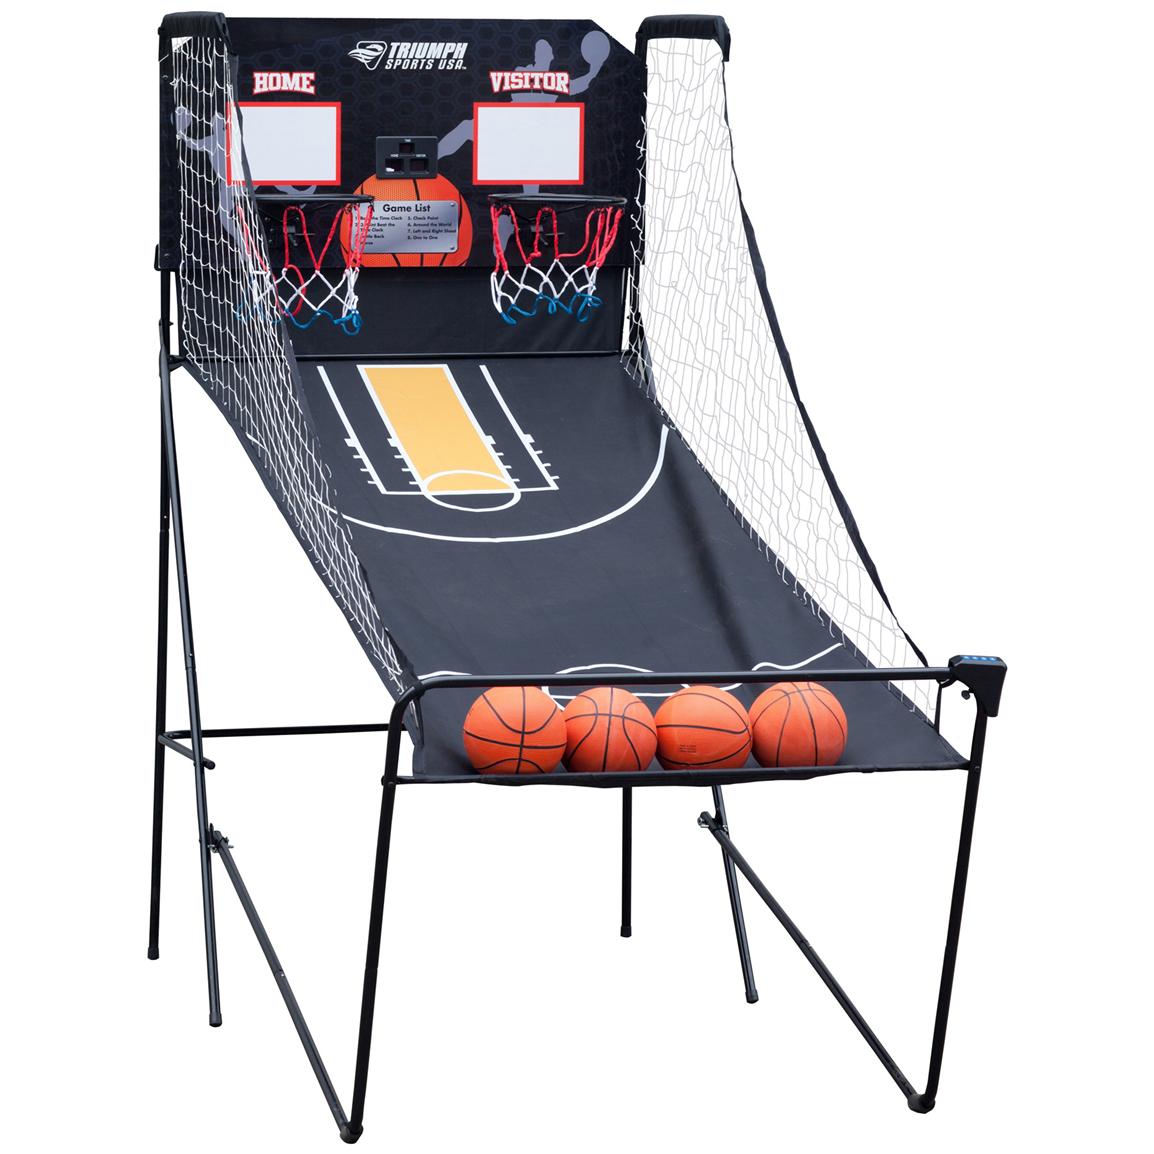 Triumph Sports 2-player 8-in-1 Arcade Basketball Game ...